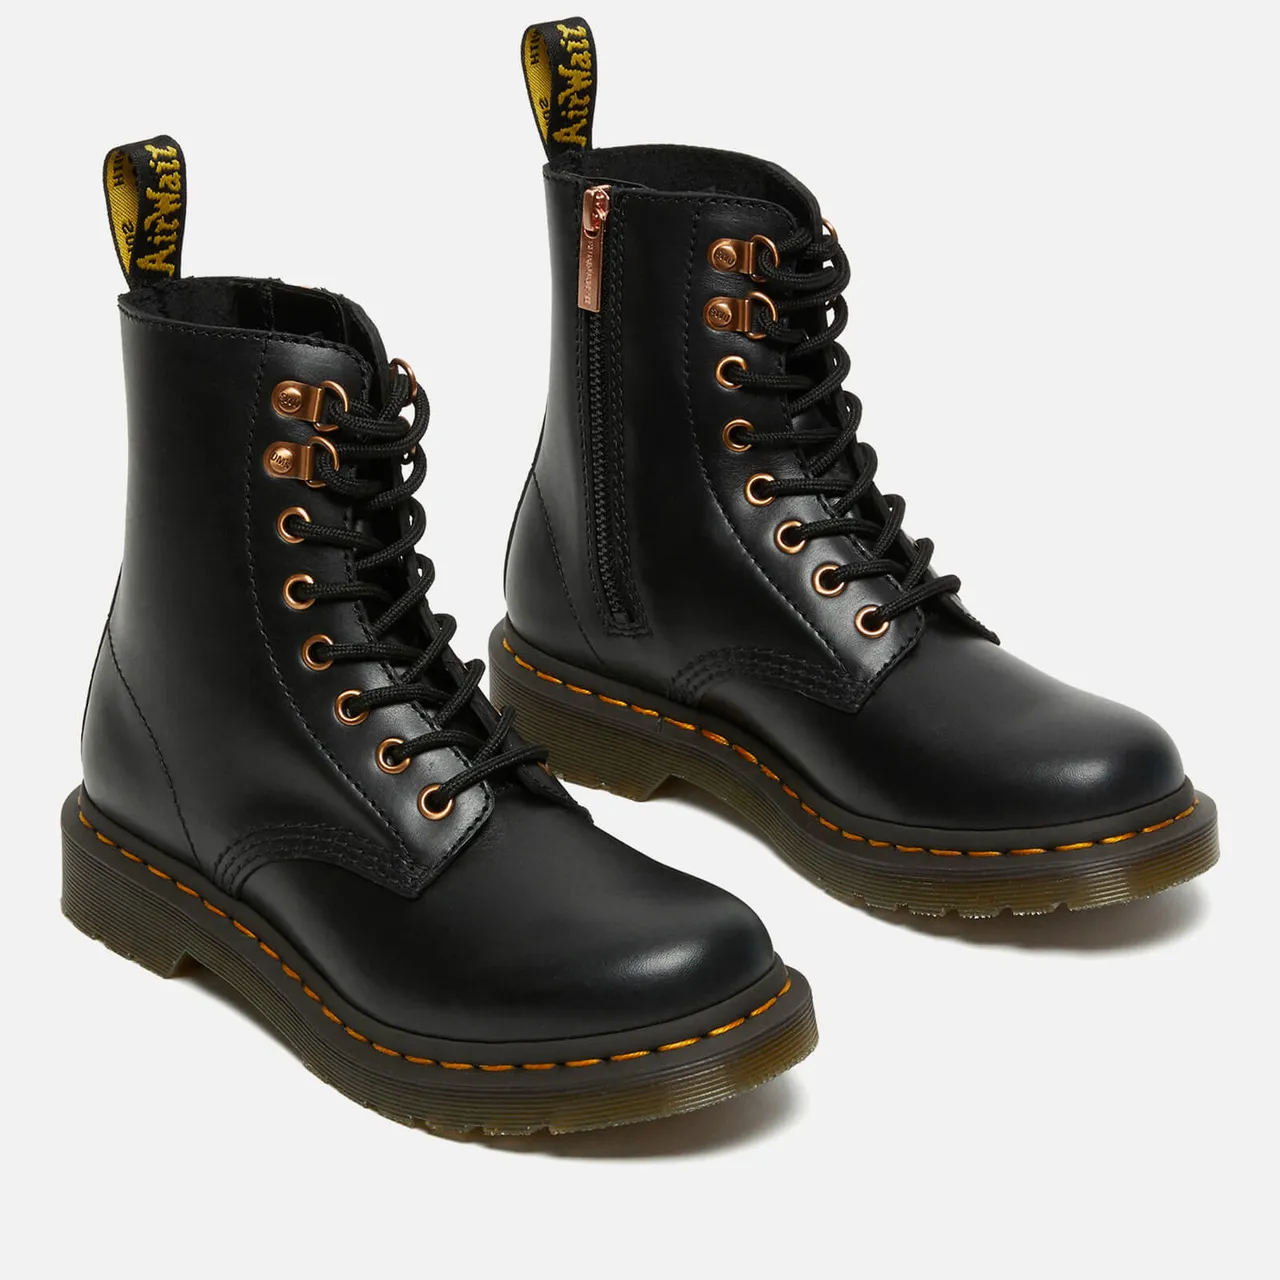 Dr. Martens Women's 1460 Wanama Leather Boots